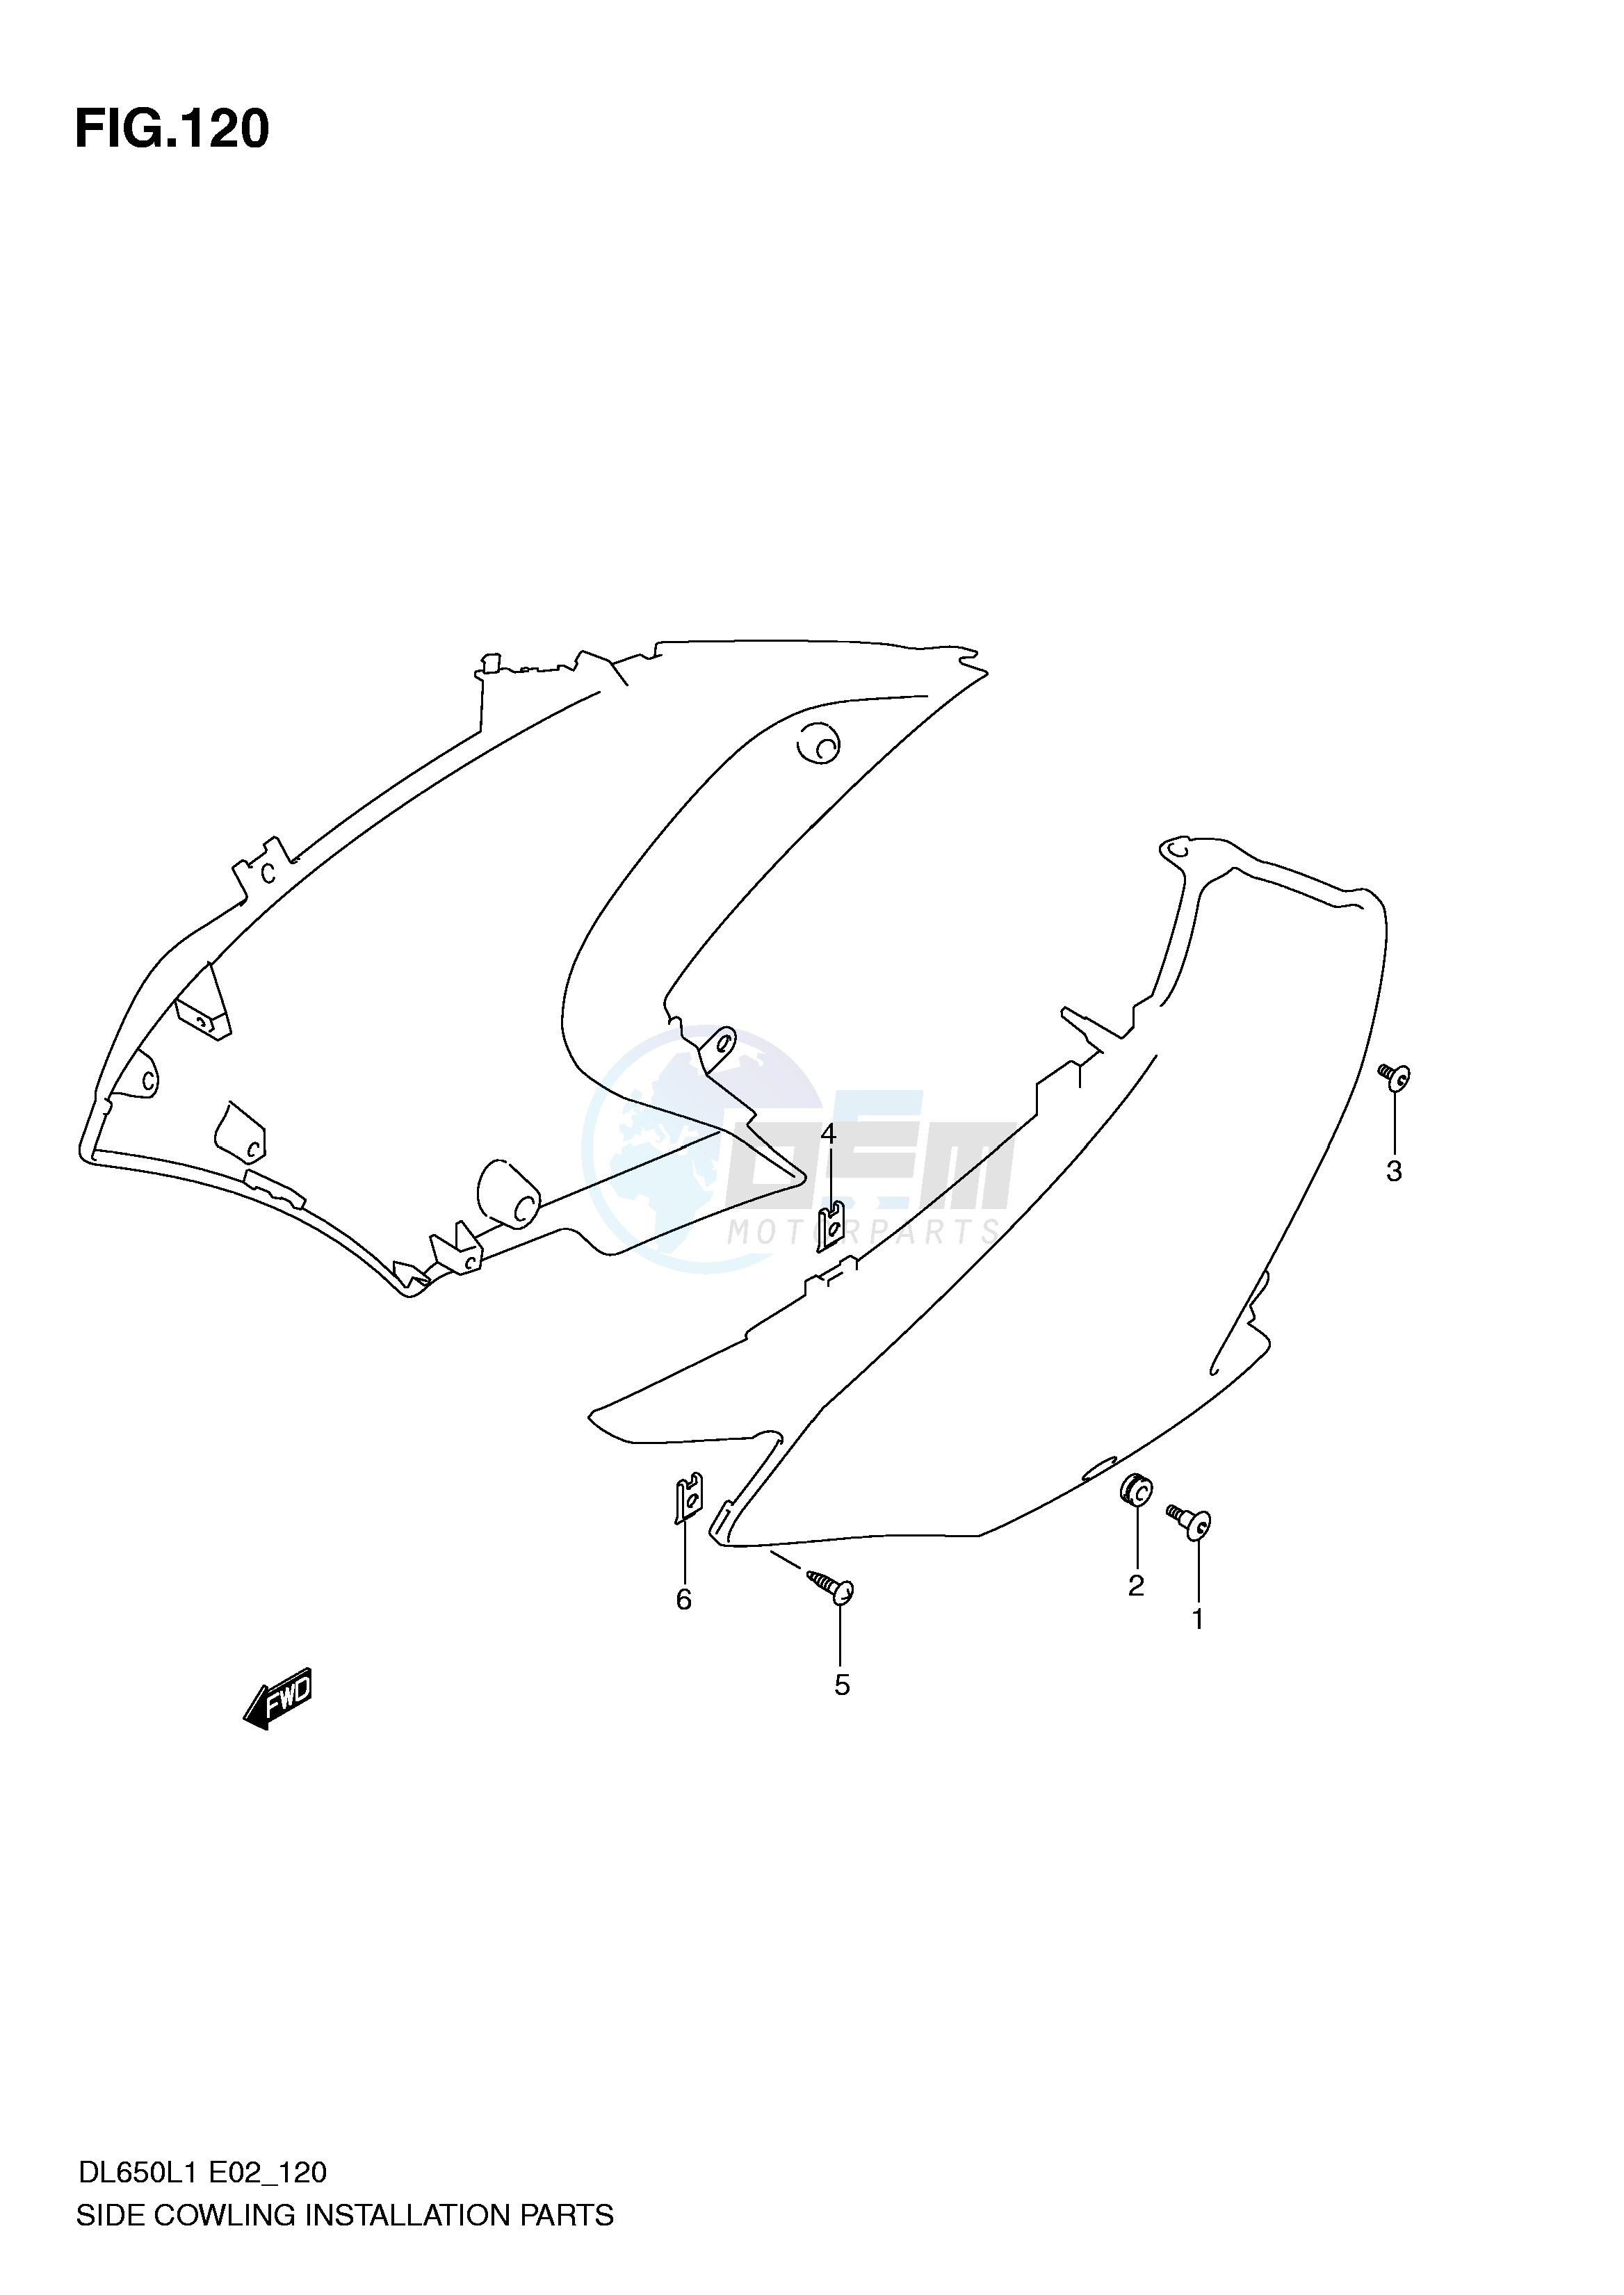 SIDE COWLING INSTALLATION PARTS image